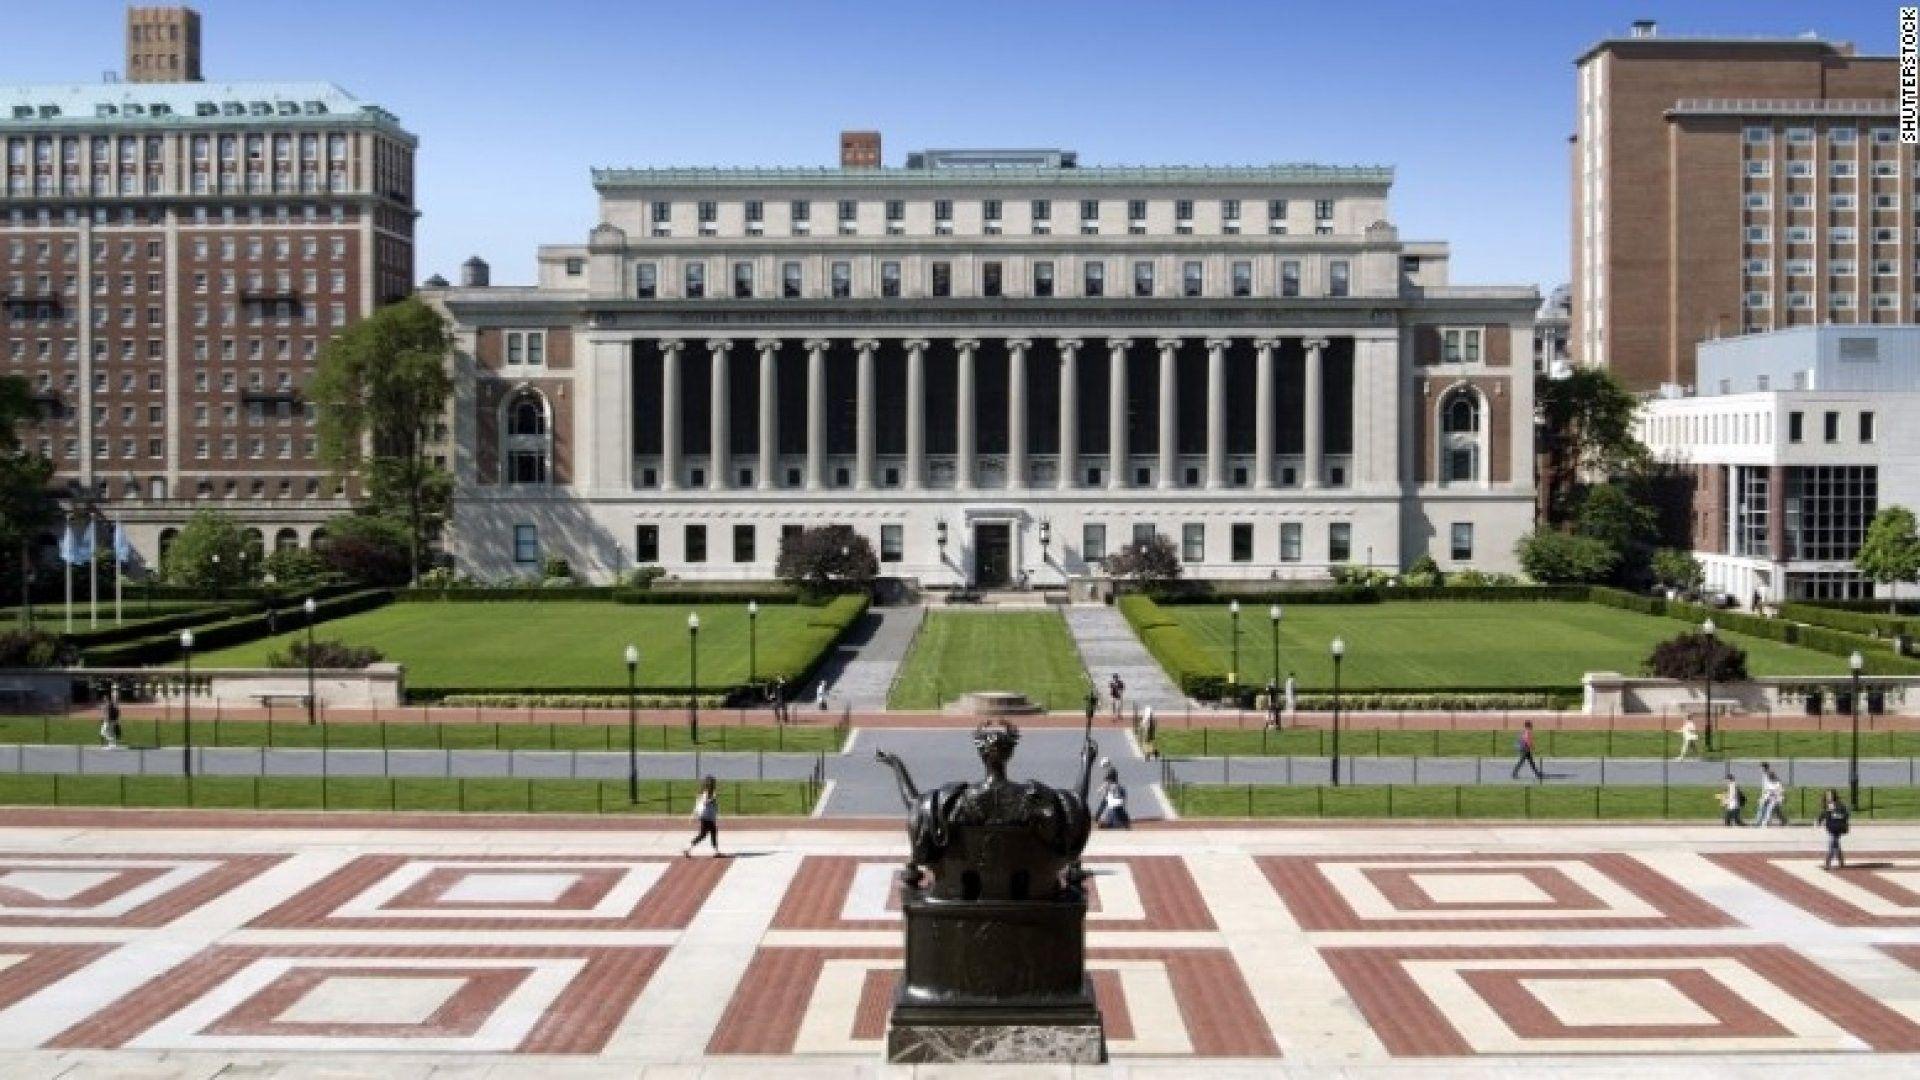 The university's flagship building is the oldest academic building in the United States still in use for its original purpose. - Columbia University